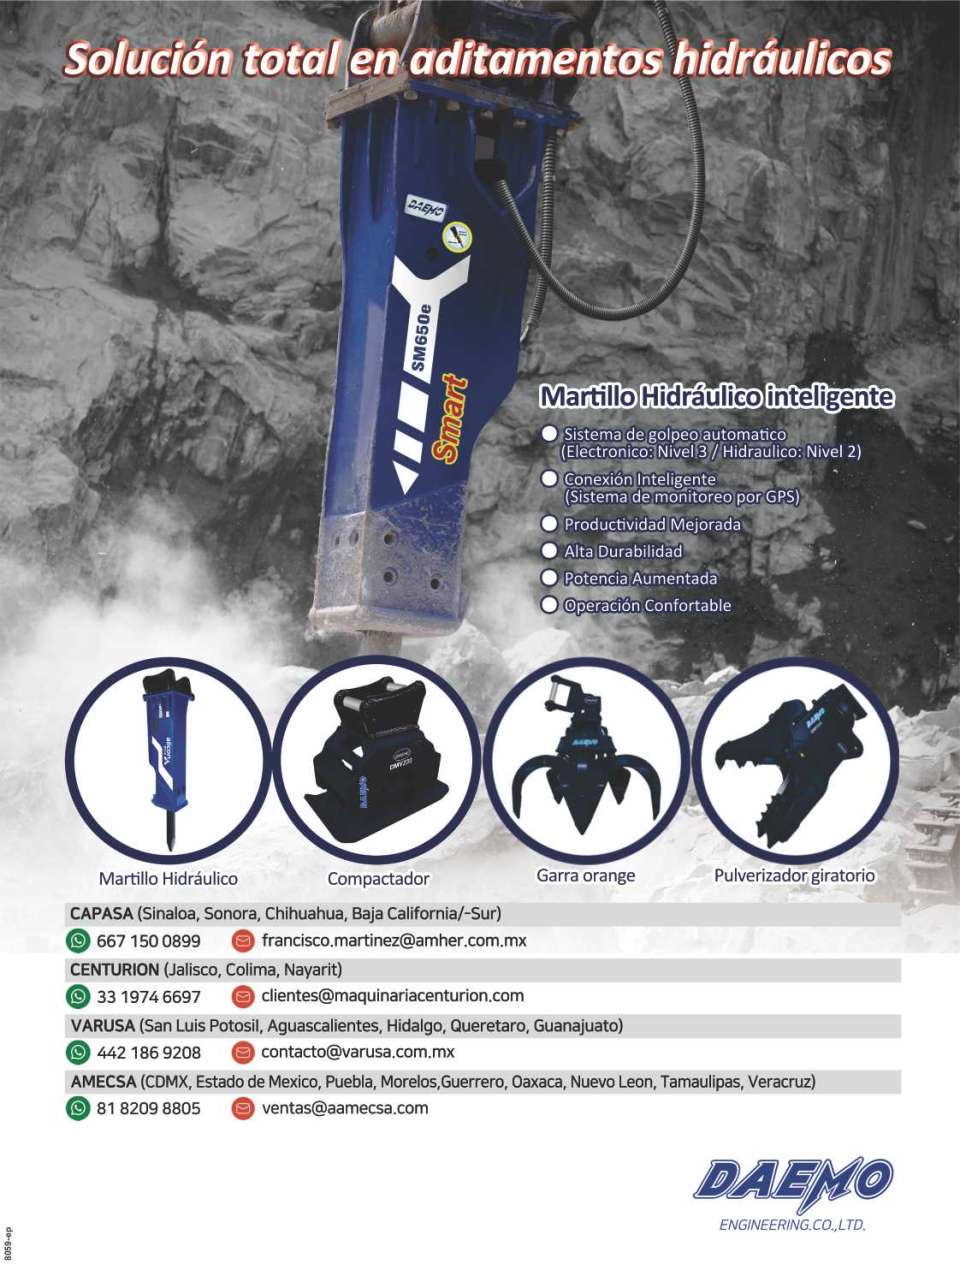 Contact our authorized DAEMO distributors in Mexico and learn more about our line of hydraulic attachments: - Hydraulic Hammers - Demolition Attachments - Clamps - Pulverizers - Shears